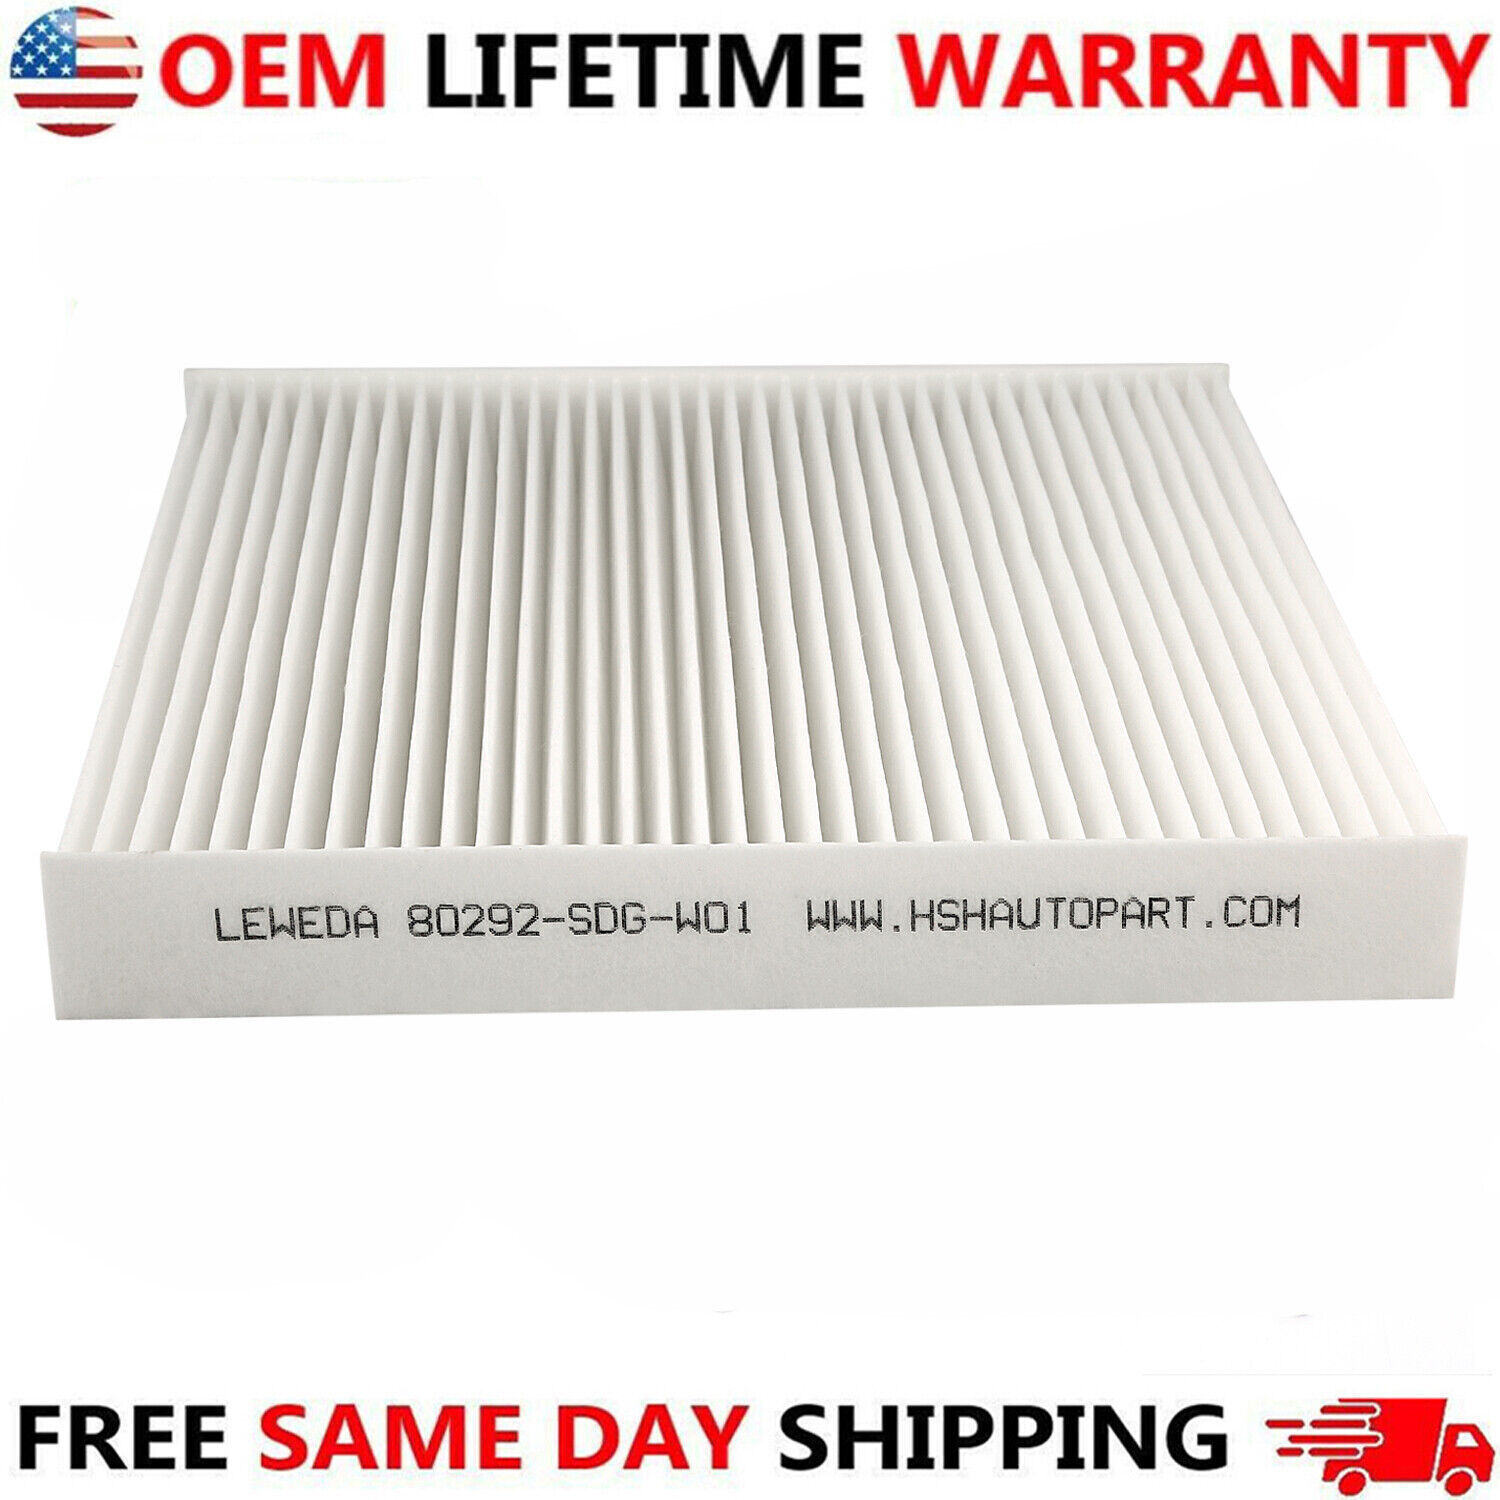 For HONDA ACCORD CABIN AIR FILTER Acura Civic CRV Odyssey C35519 FAST SHIPPING*